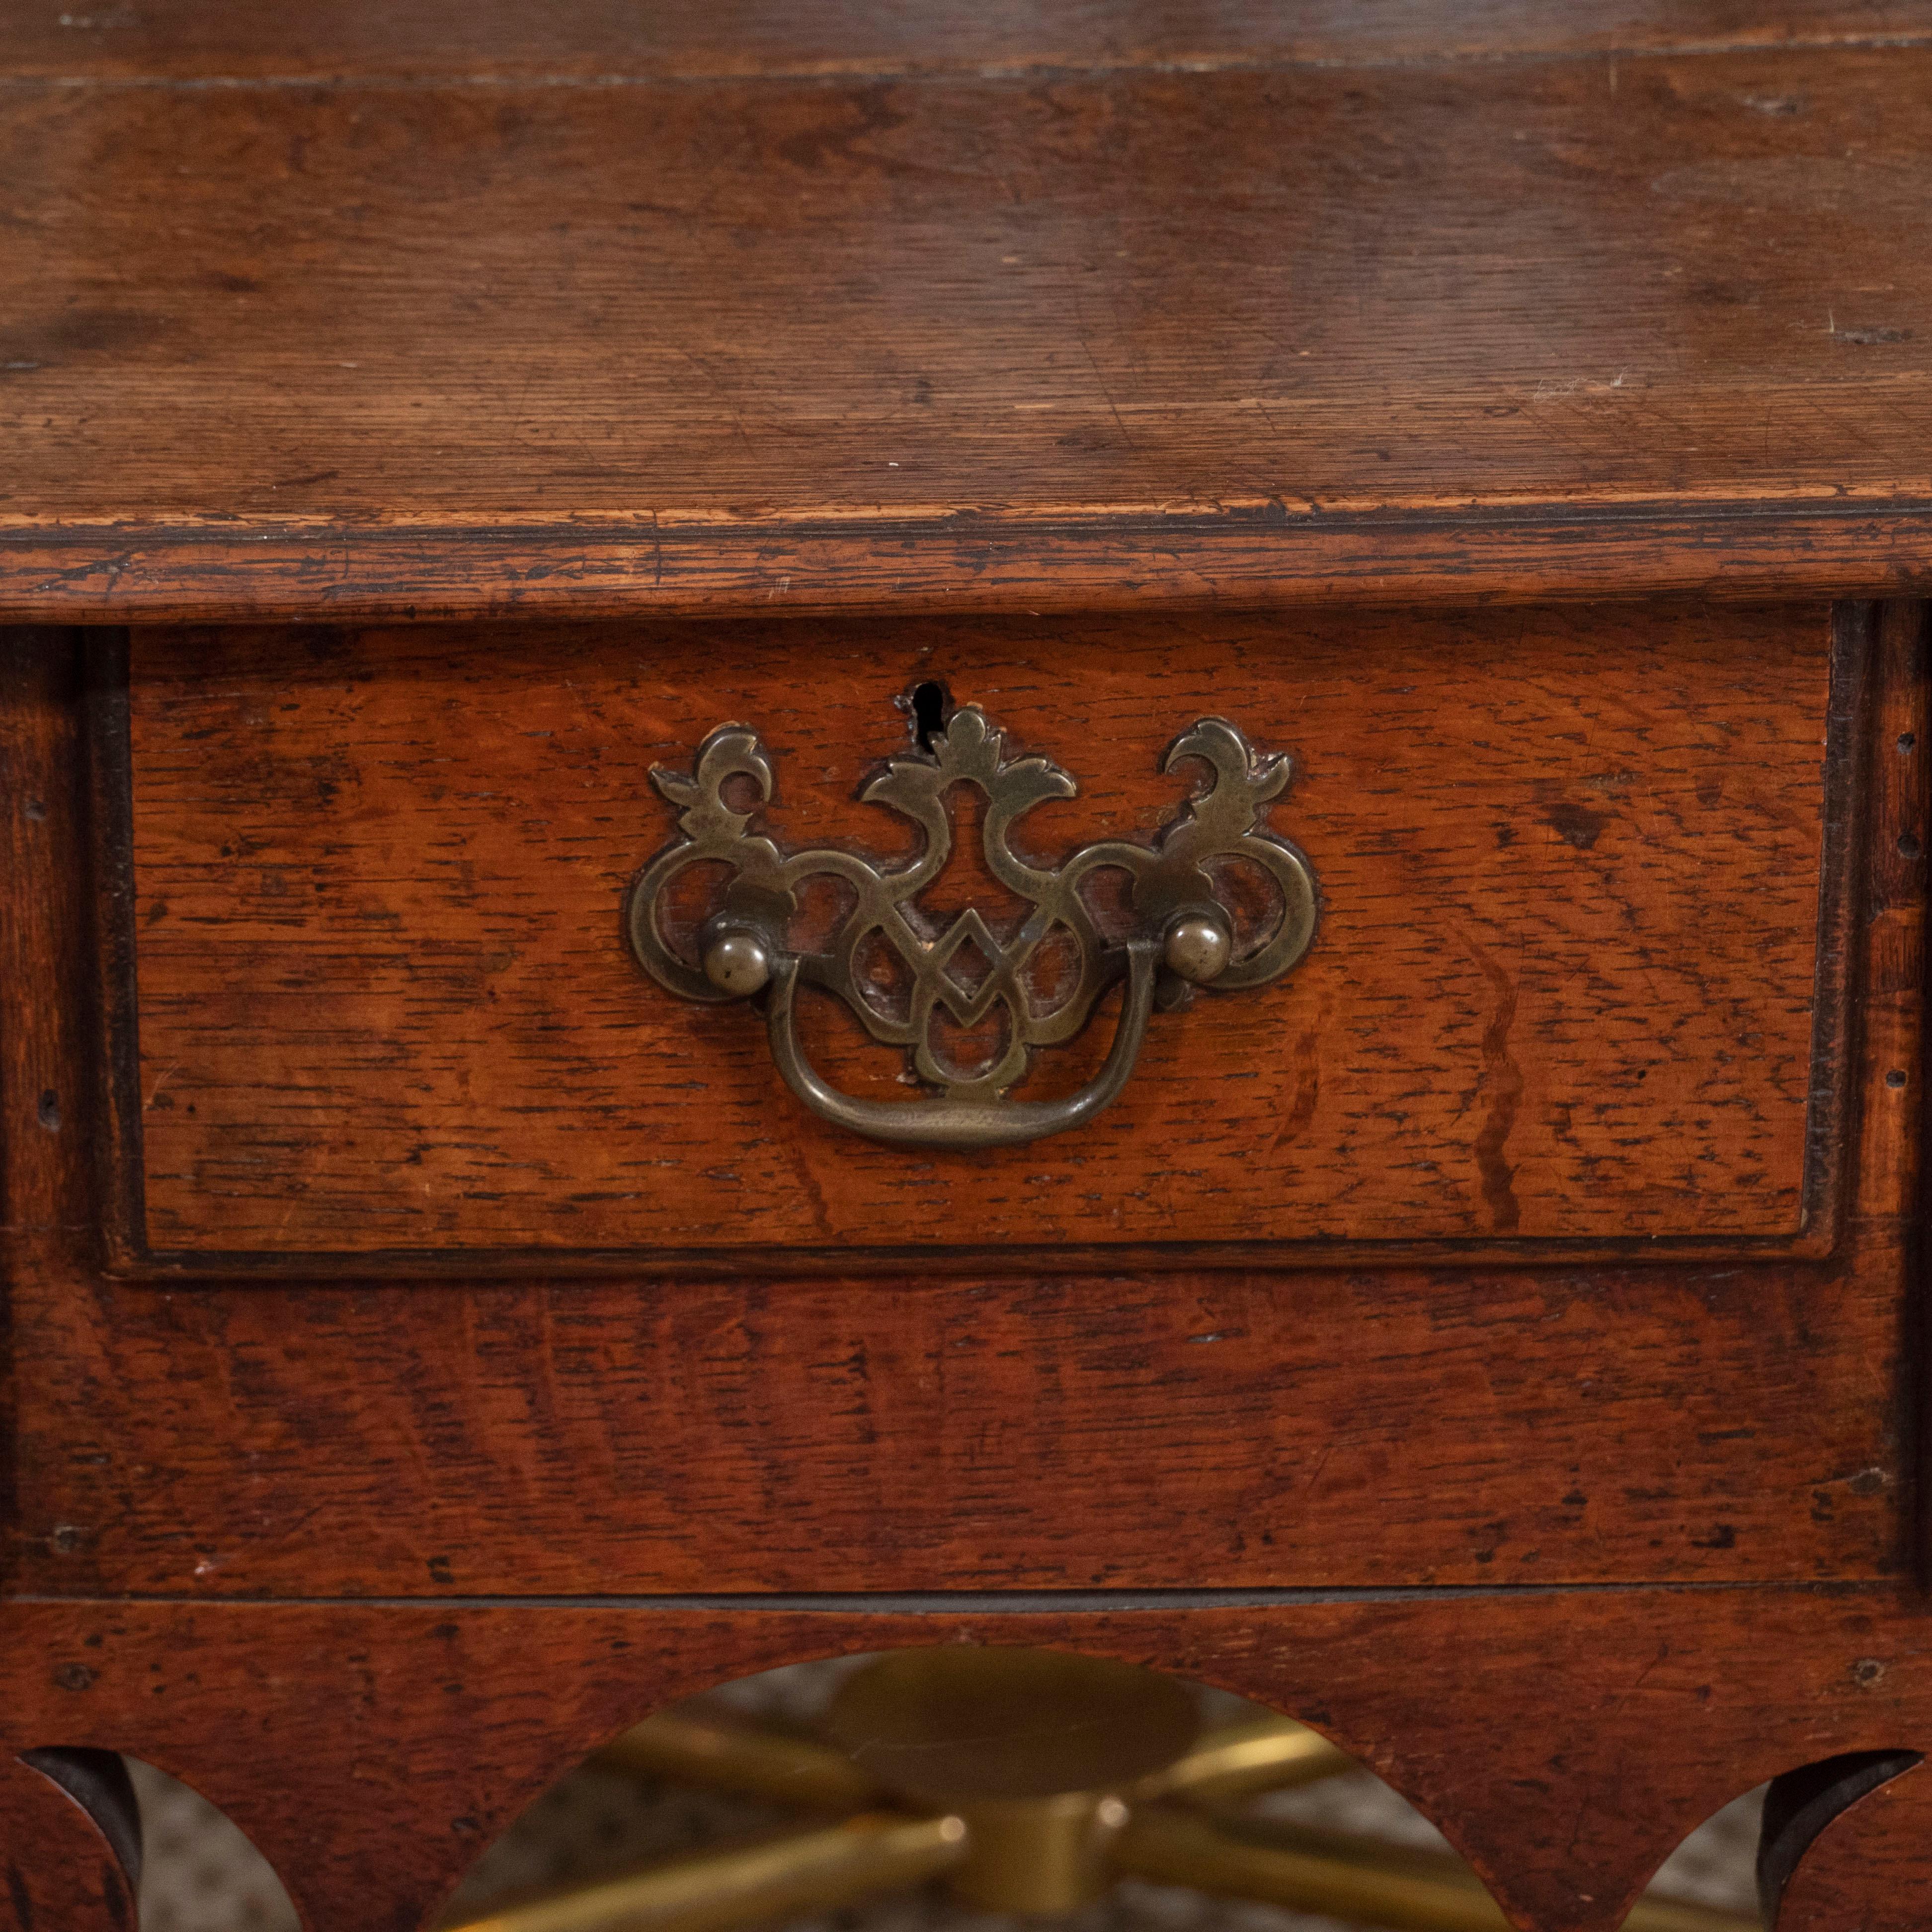 An early 18th century English lowboy dressing table, featuring three short drawers and brass Chippendale-style hardware supported by four legs. The finish has aged to a lovely deep golden brown.